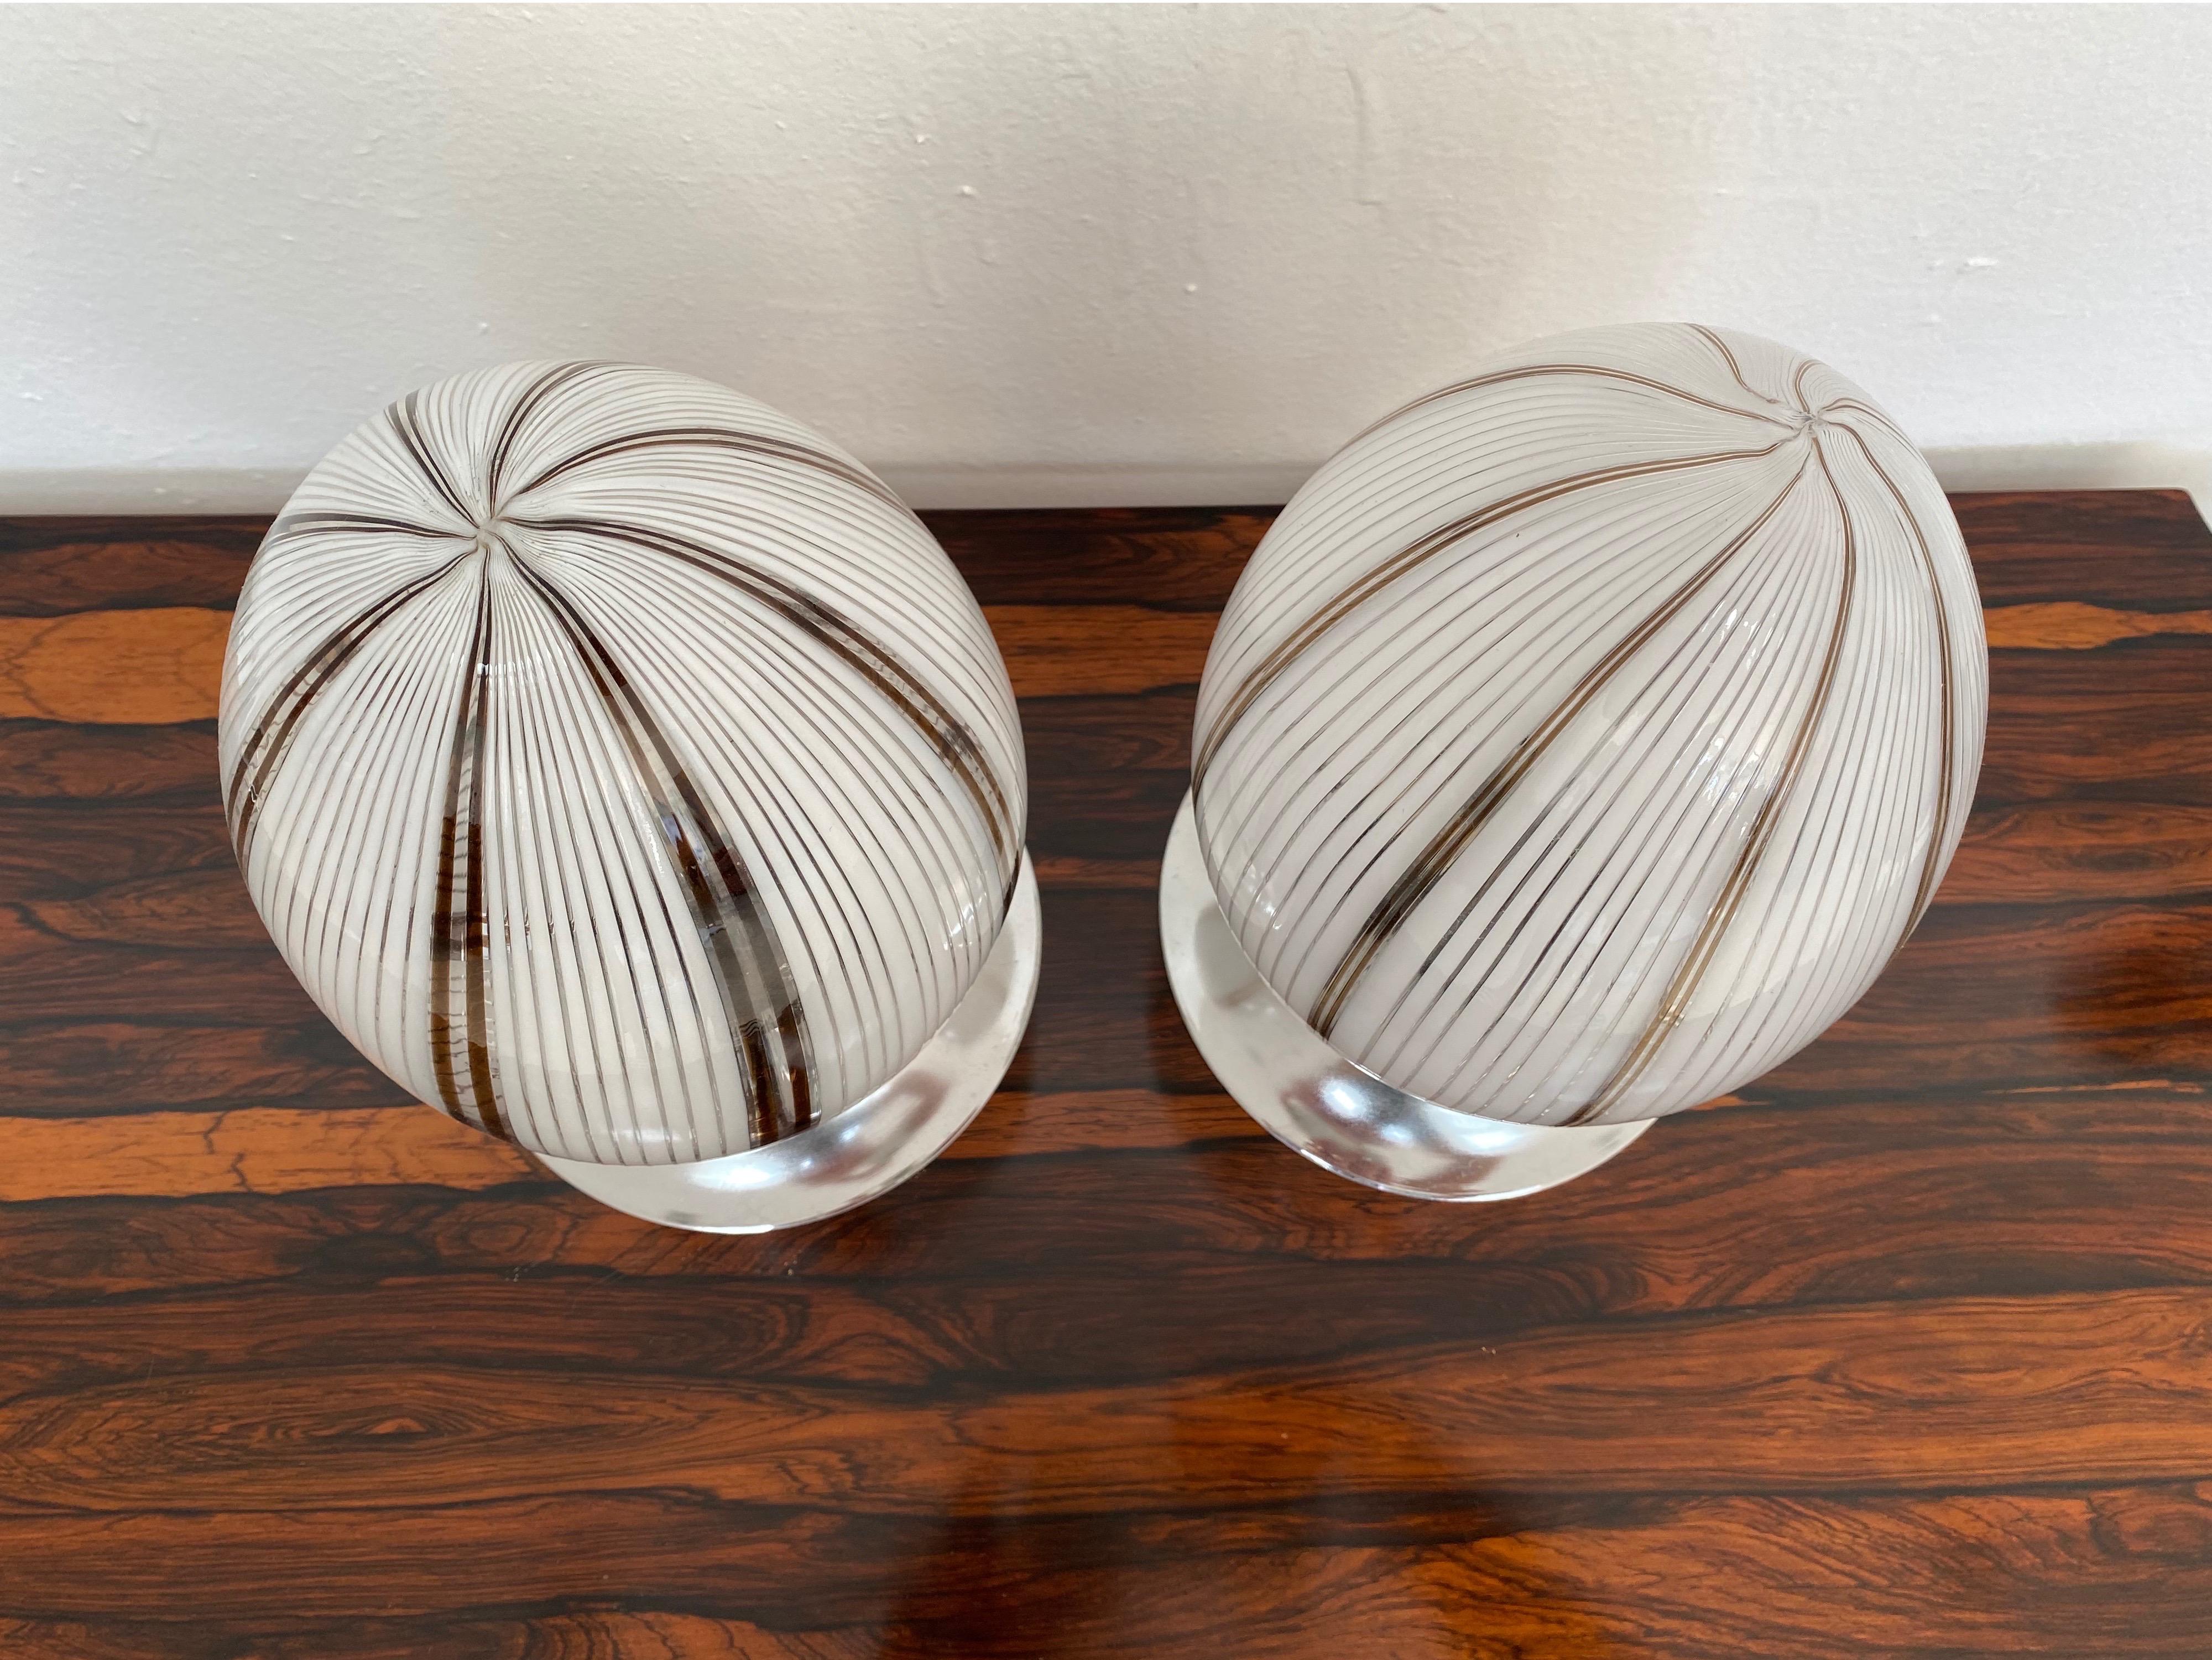 Pair of Mid-Century Modern Table Lamps Attributed to Venini, Murano, circa 1980 For Sale 1